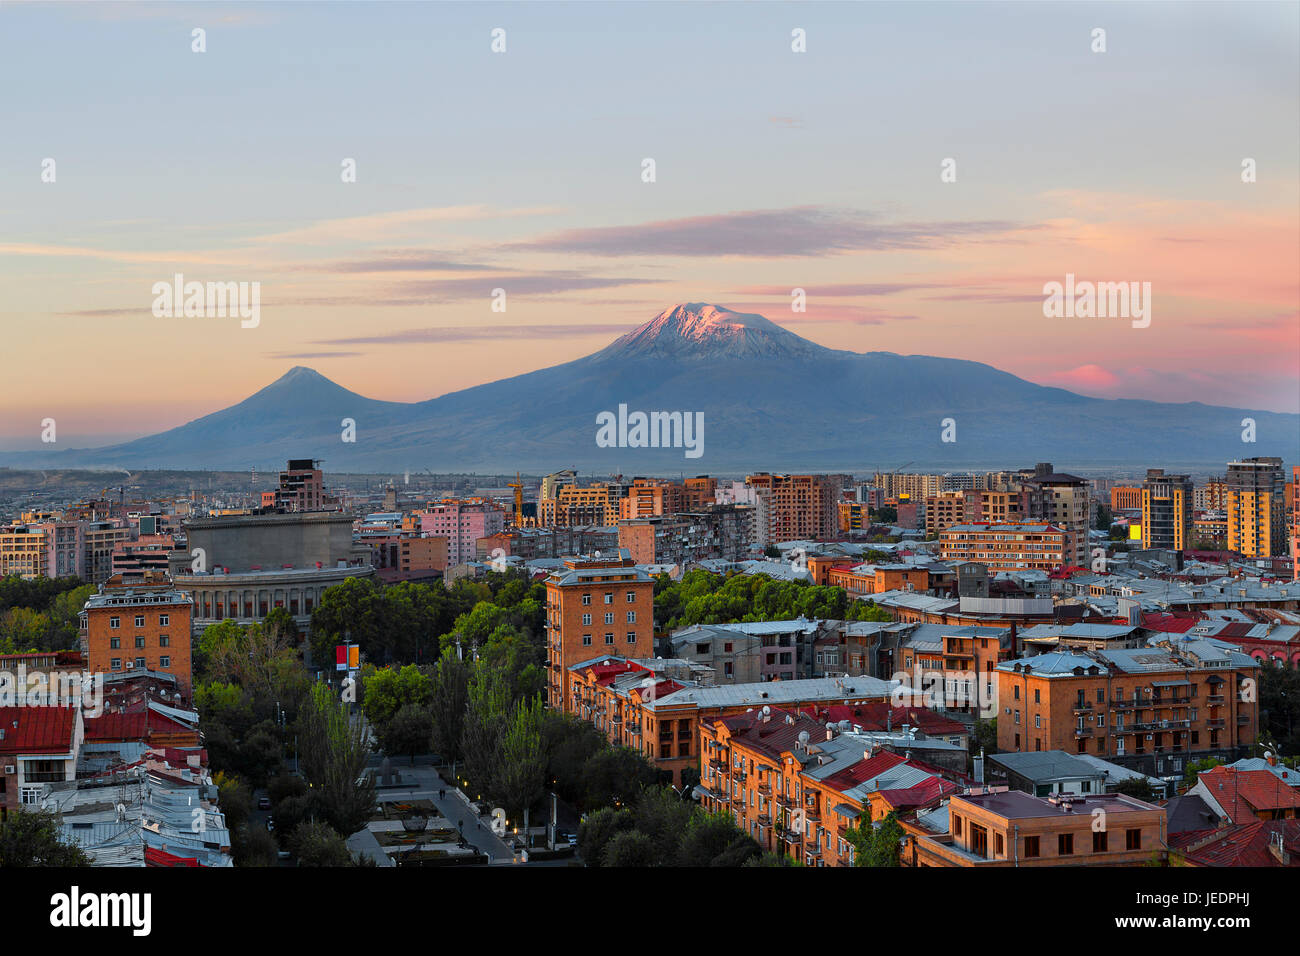 View over Yerevan at the sunrise with the two peaks of the Mt Ararat in the background, Armenia. Stock Photo